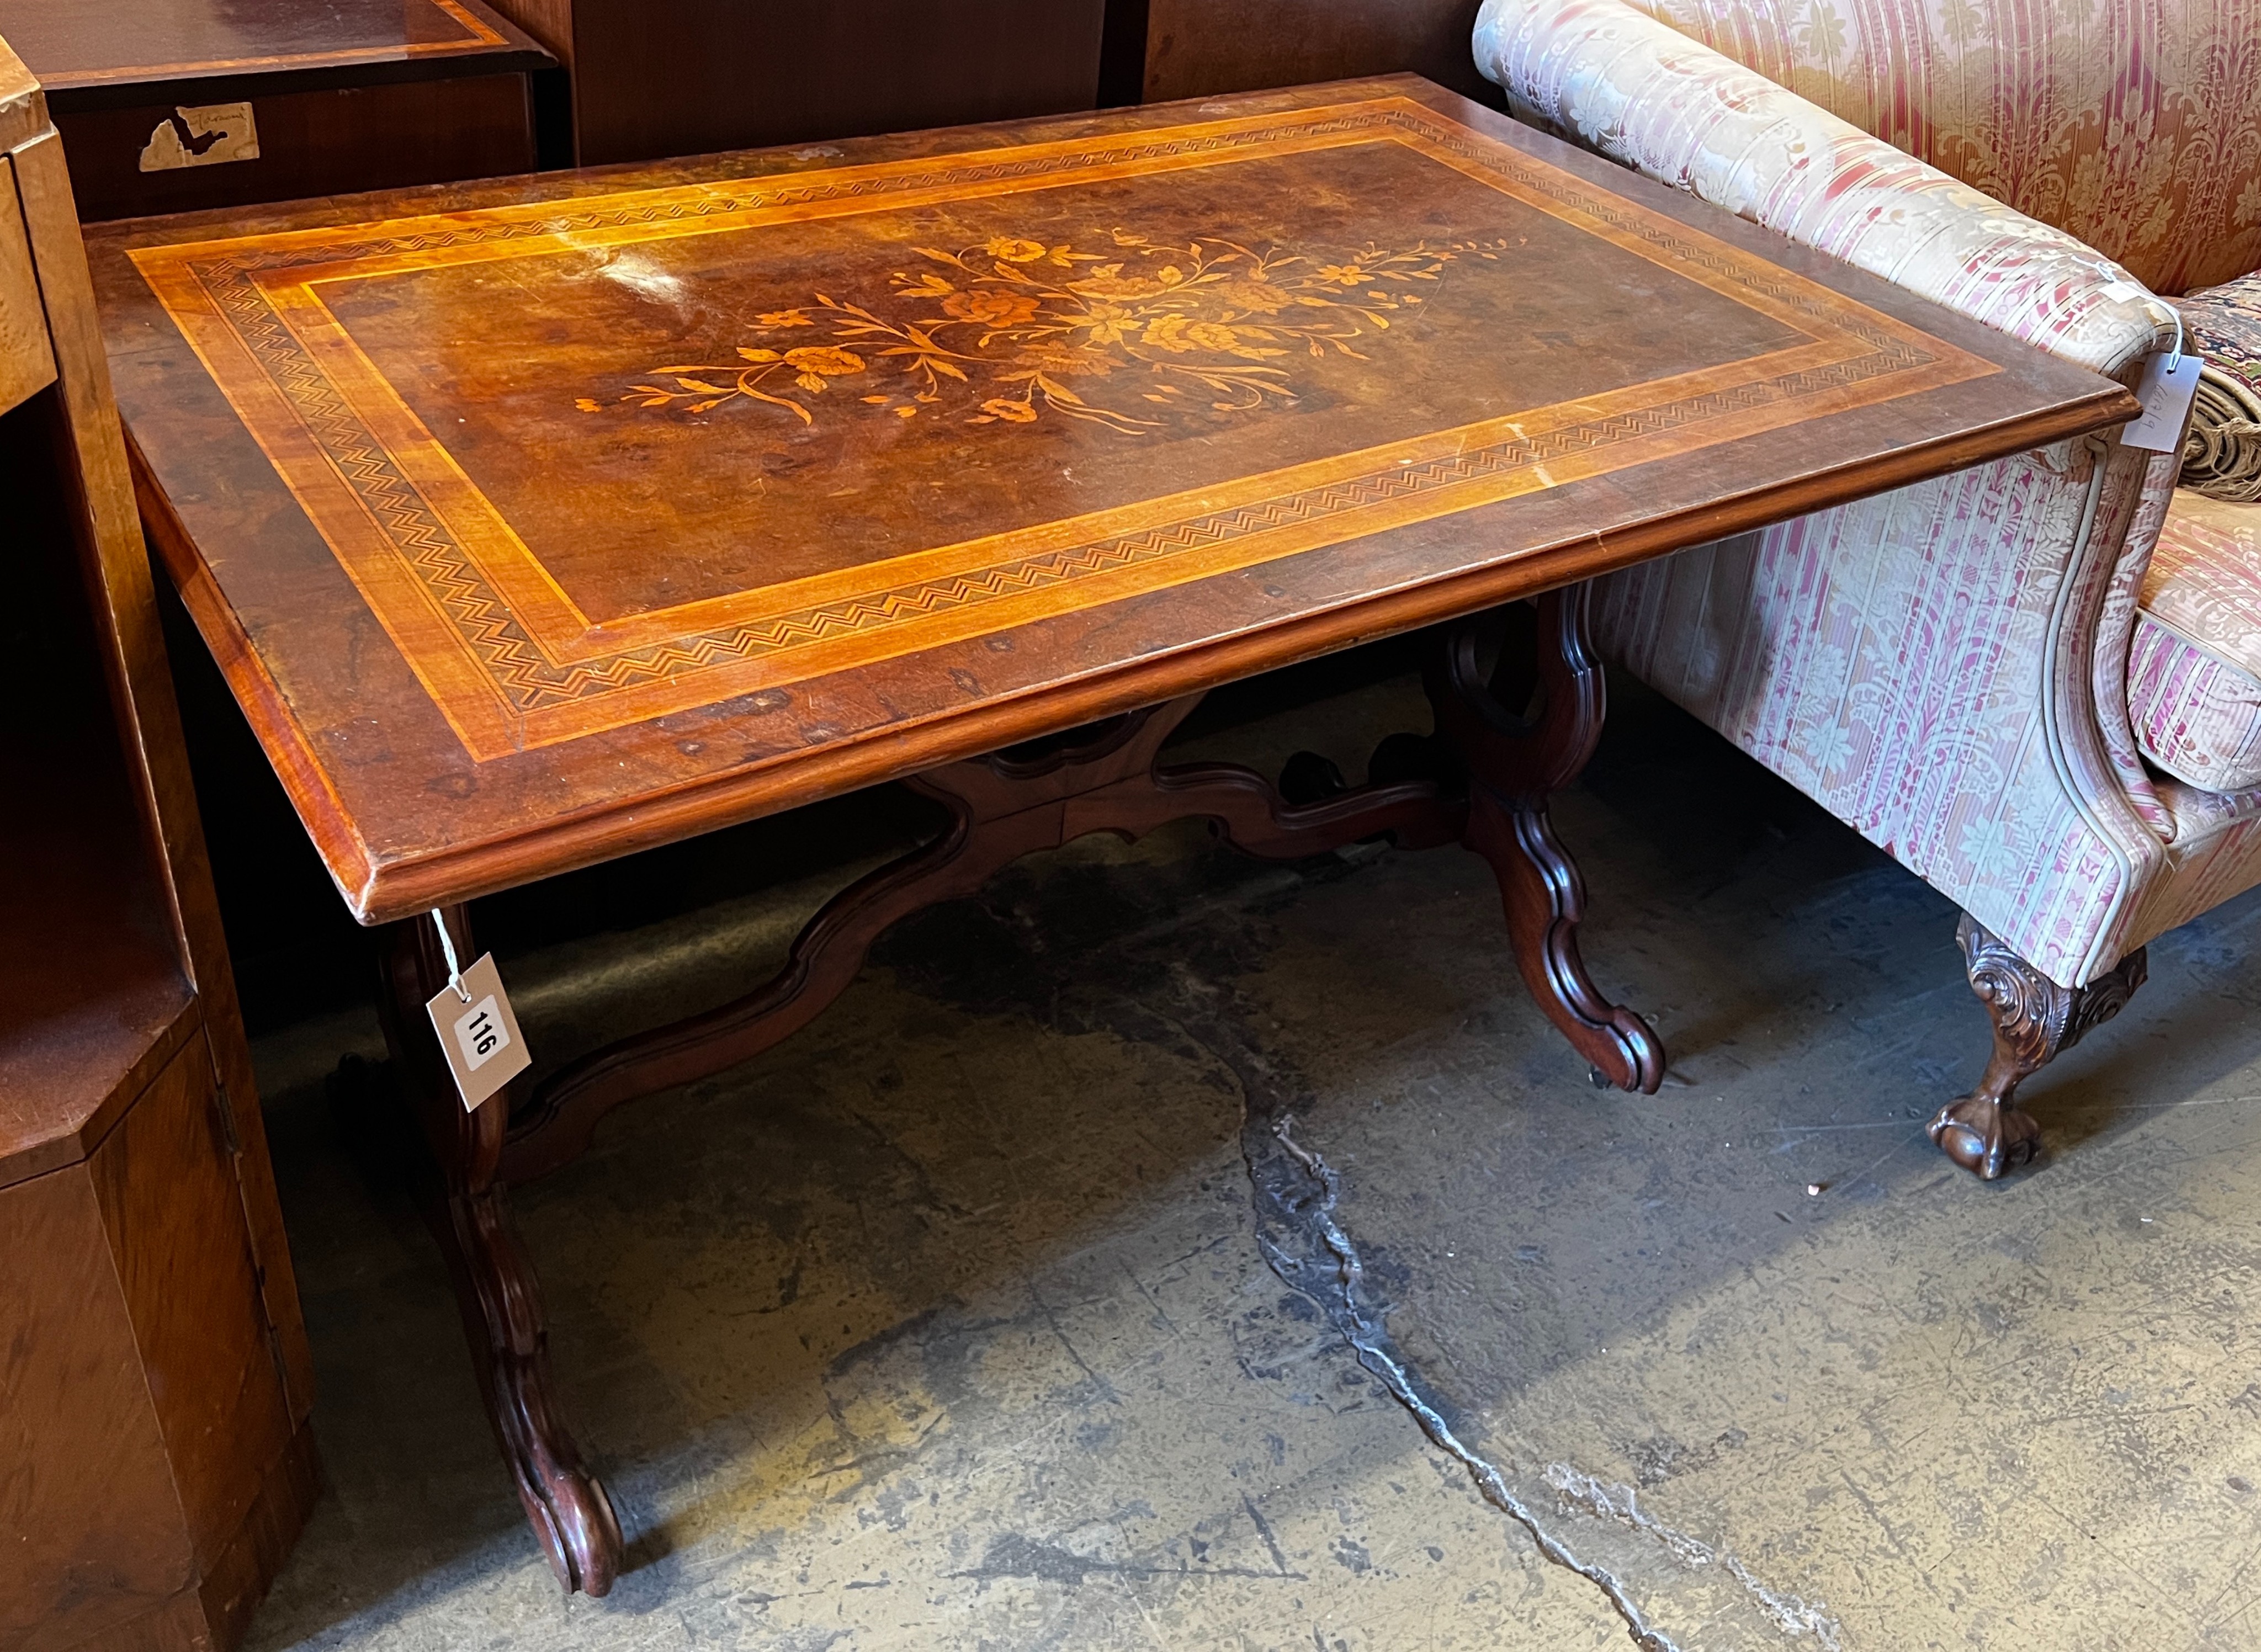 A 19th century French rectangular marquetry inlaid walnut centre table, width 120cm, depth 77cm, height 74cm